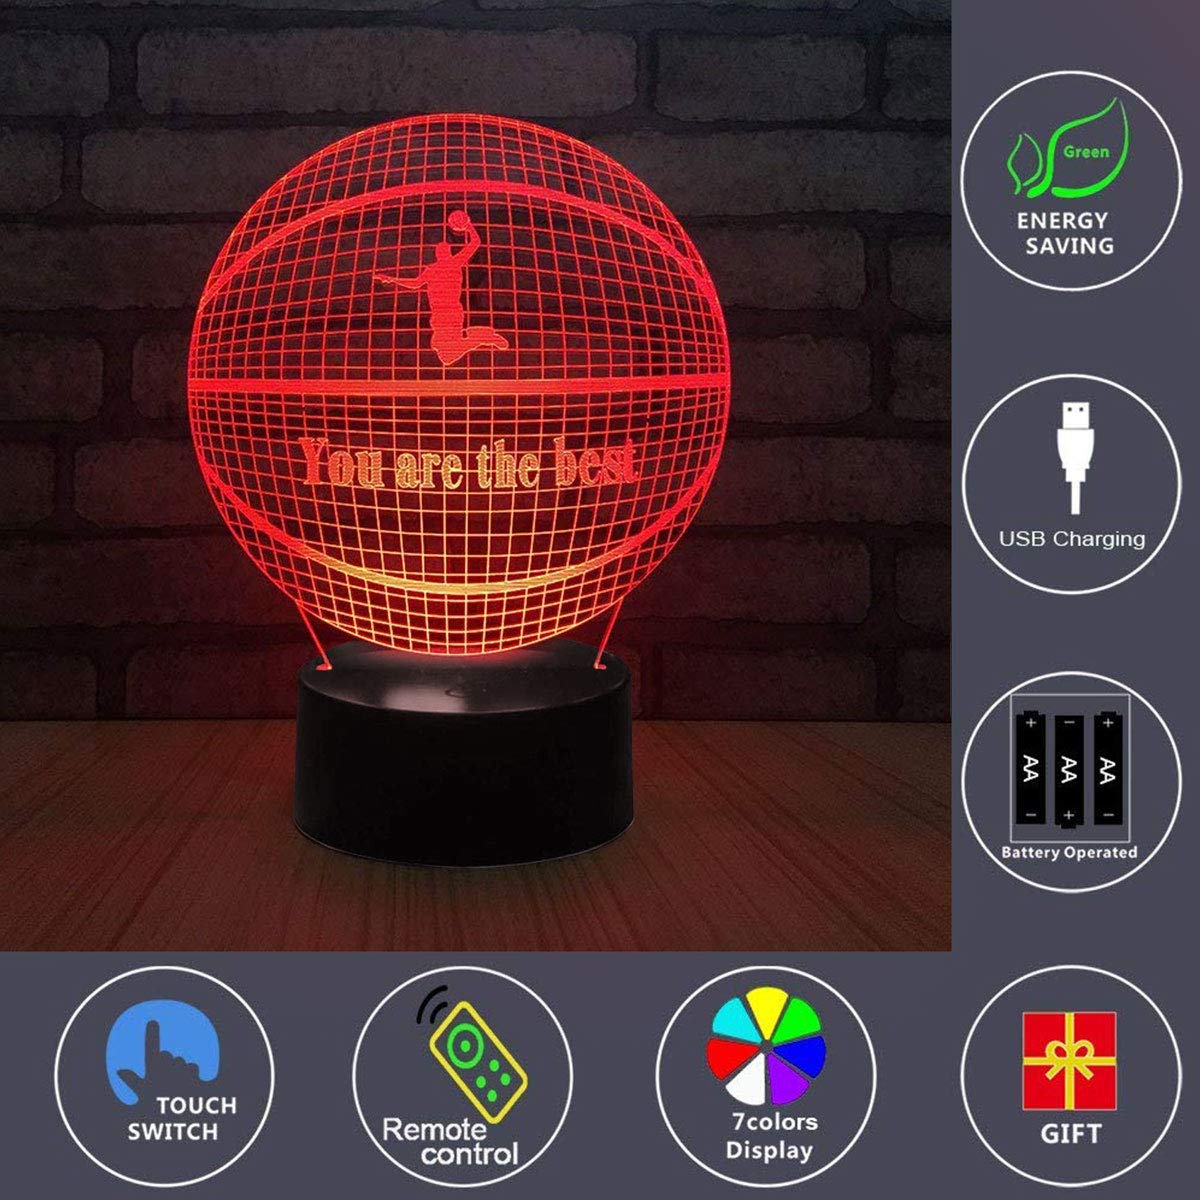 Epicgadget 3D Remote Night Light for Kids, Touch Control Optical Illusion Visualization LED Night Stand Light 7 Colors Changing with Remote Control Nightstand Lamp Christmas Gifts (Basketball) - image 3 of 3